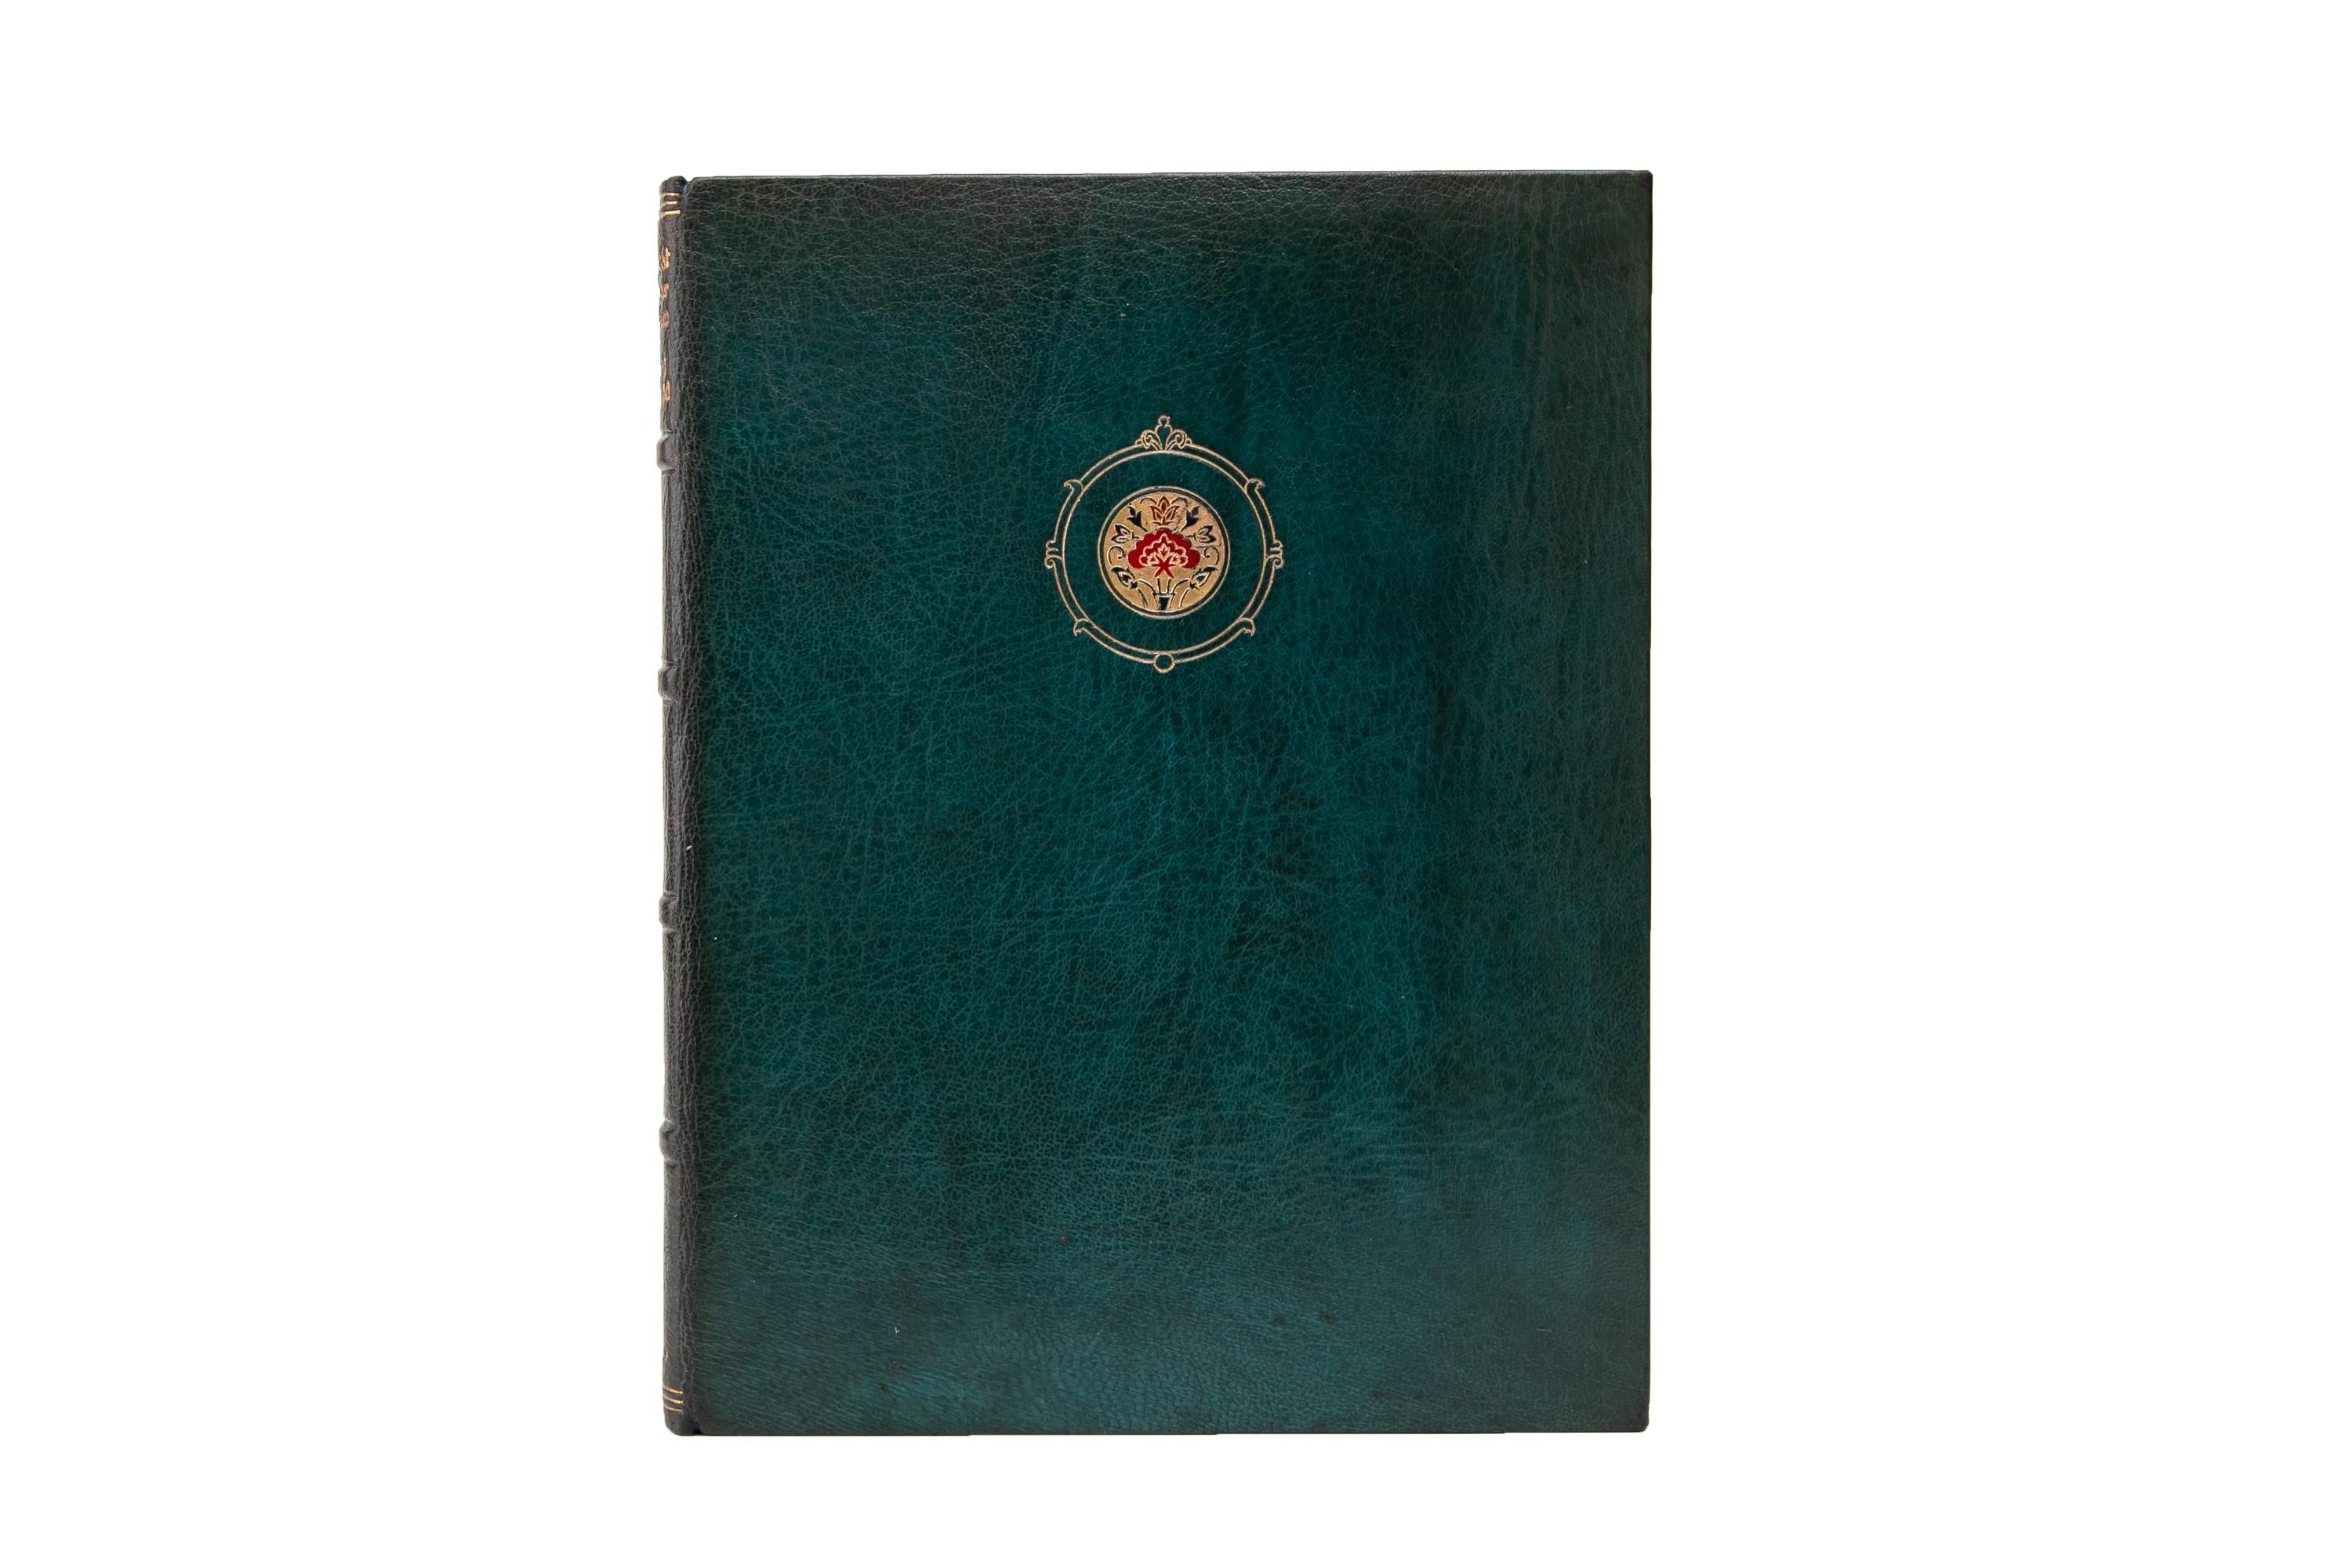 1 Volume. Edward Fitzgerald, Rubáiyát of Omar Khayyám. Bound in full blue morocco with the cover displaying a central floral crest in gilt-tooling and multi-color inlay. The spine displays raised bands and gilt-tooled label lettering. The top edge